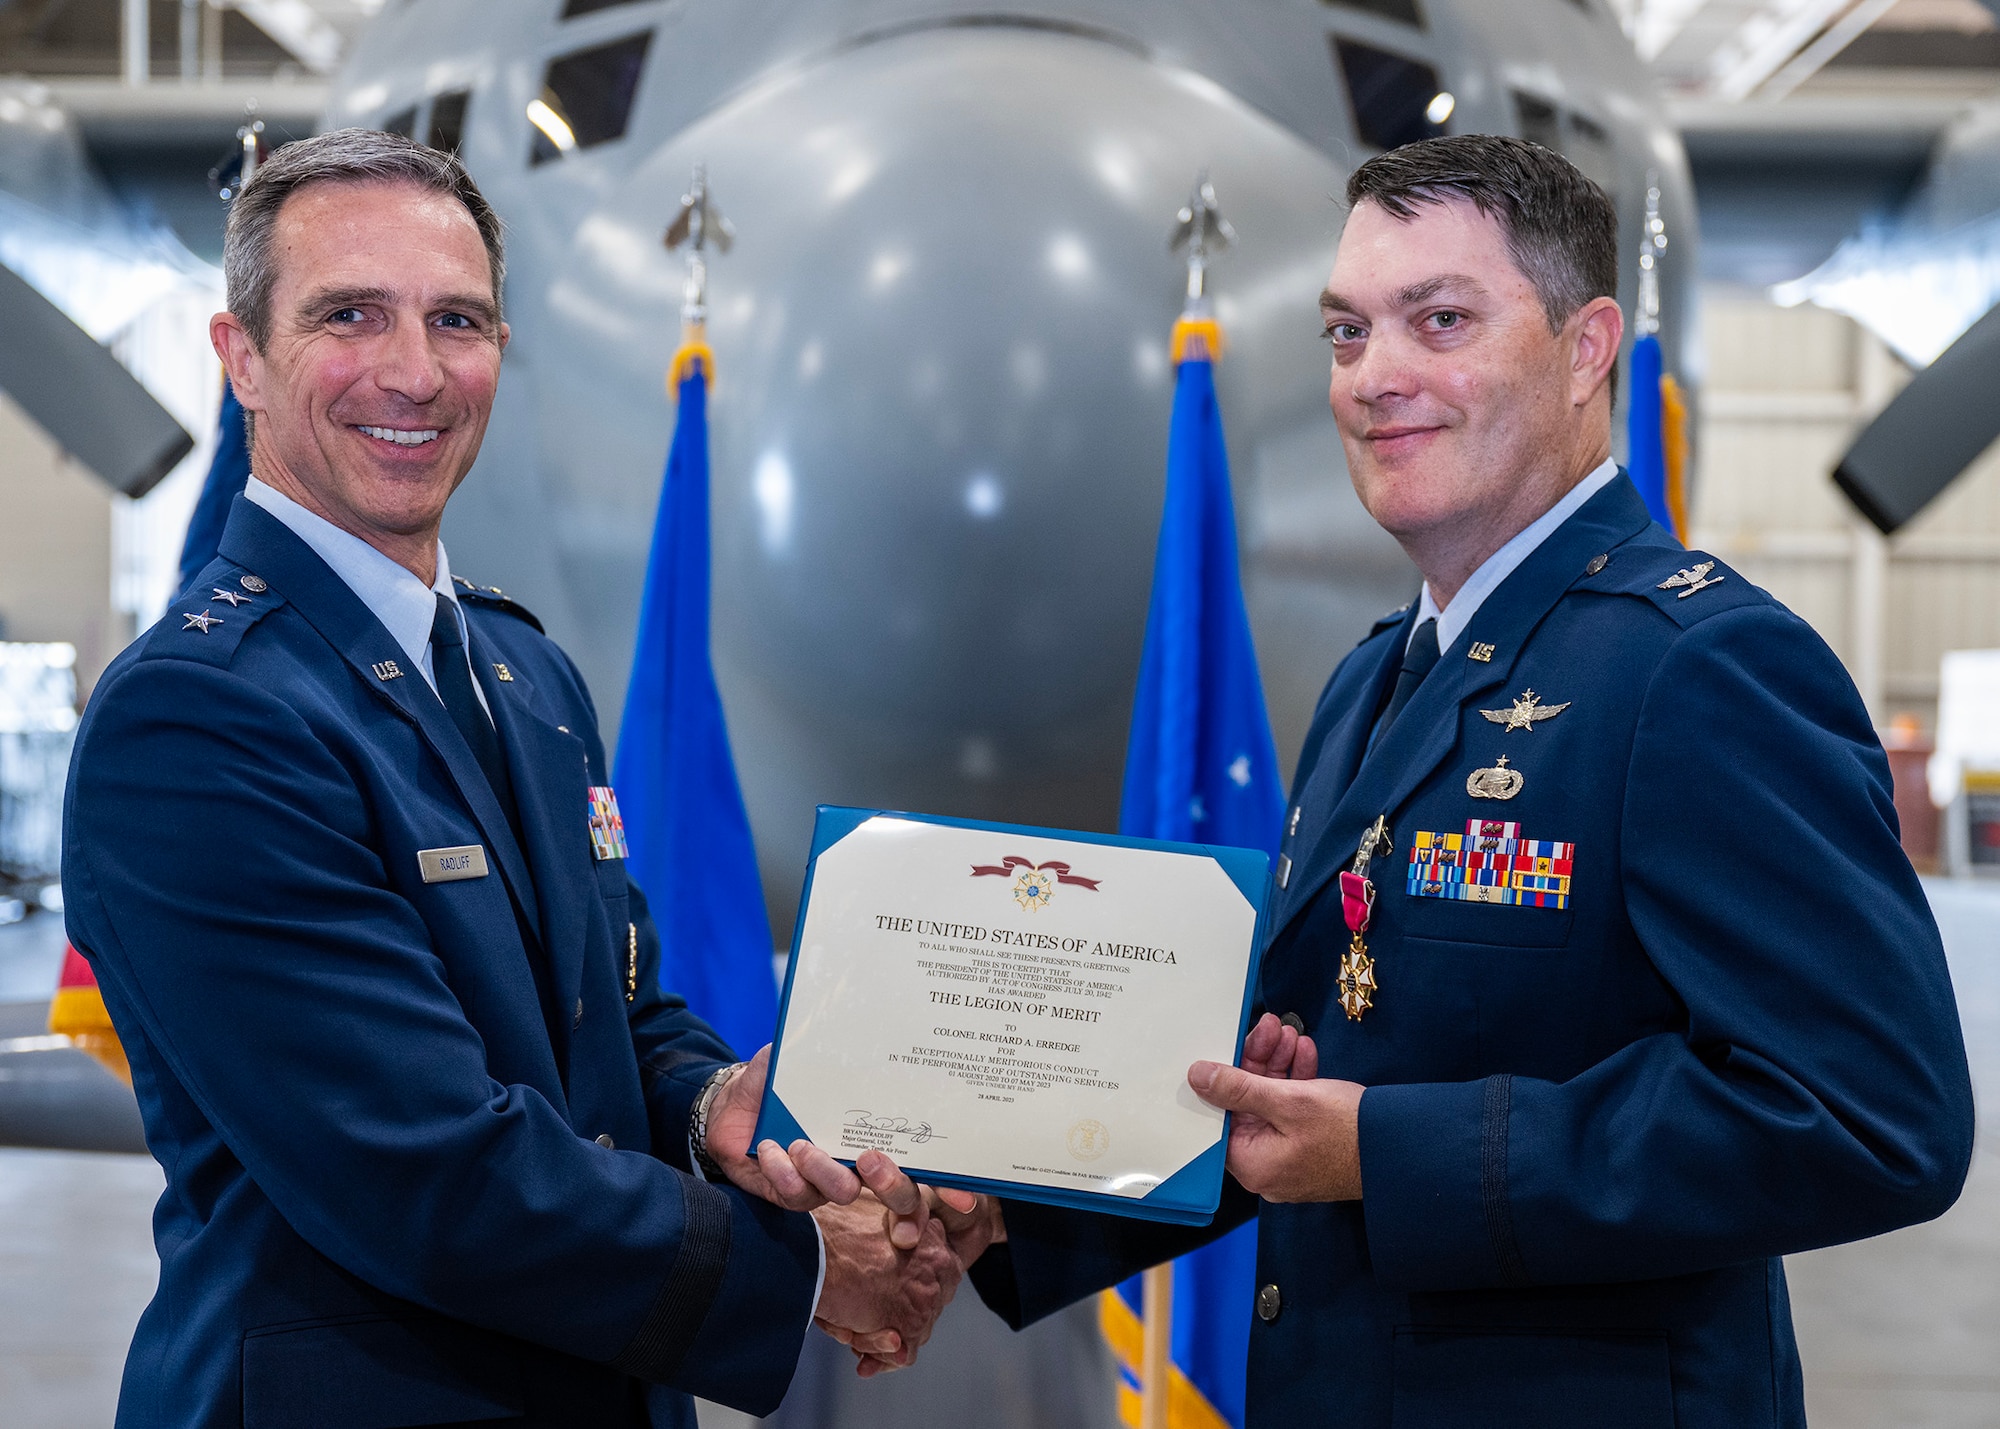 Col. Richard A. Erredge receives the Legion of Merit from Maj. Gen. Bryan P. Radliff during the 960th Cyberspace Wing change of command ceremony at Joint Base San Antonio-Lackland, Texas on May 7, 2023. (U.S. Air Force photo by Brian Boisvert)